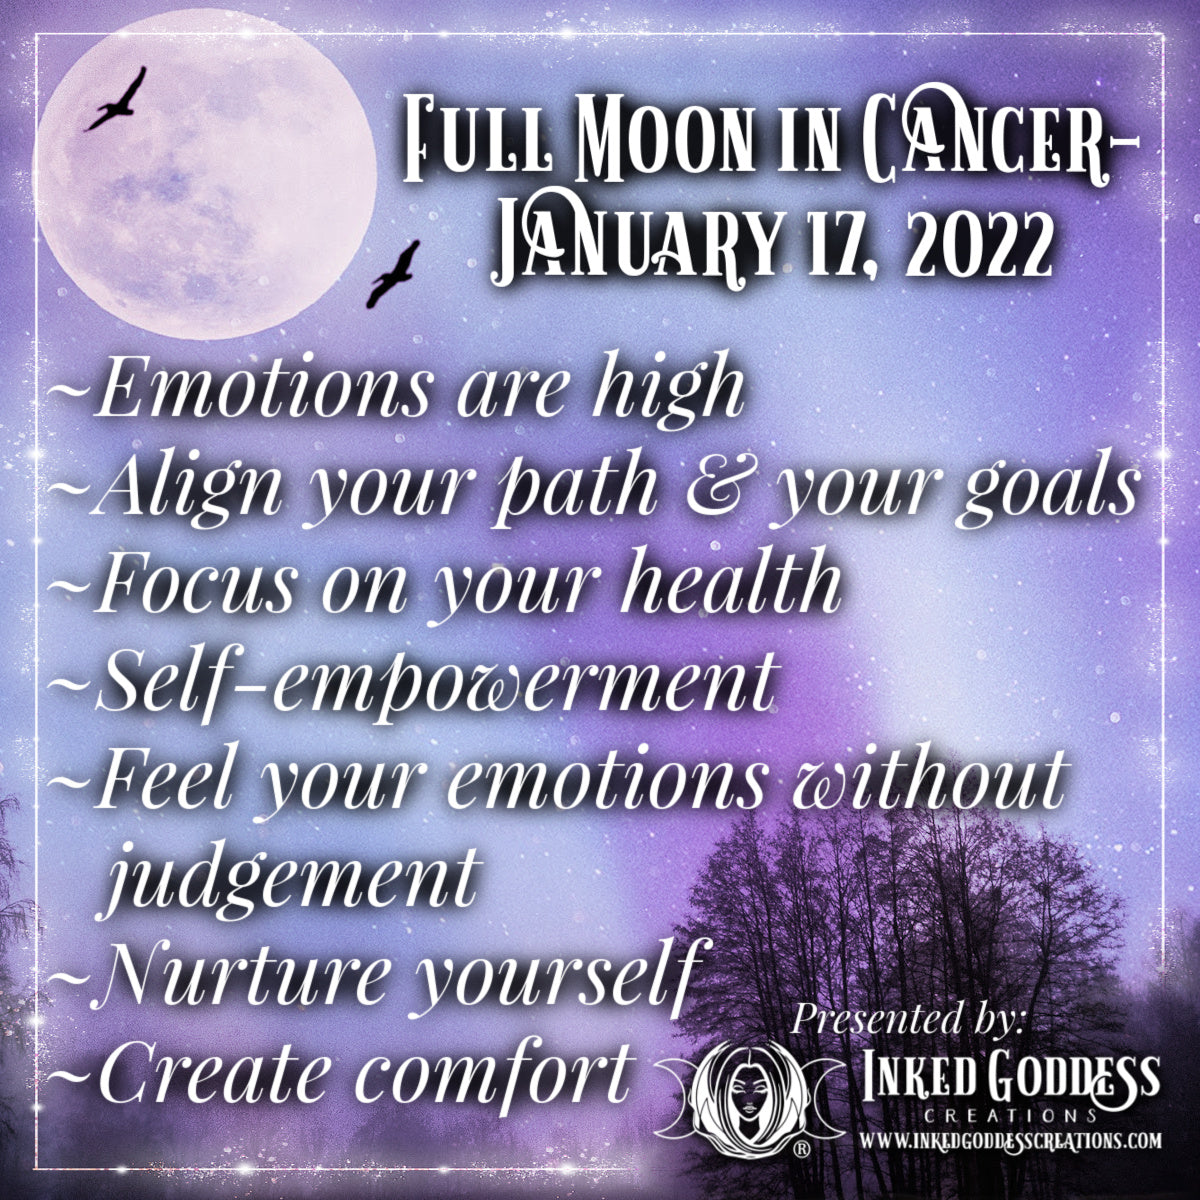 Full Moon in Cancer- January 17, 2022